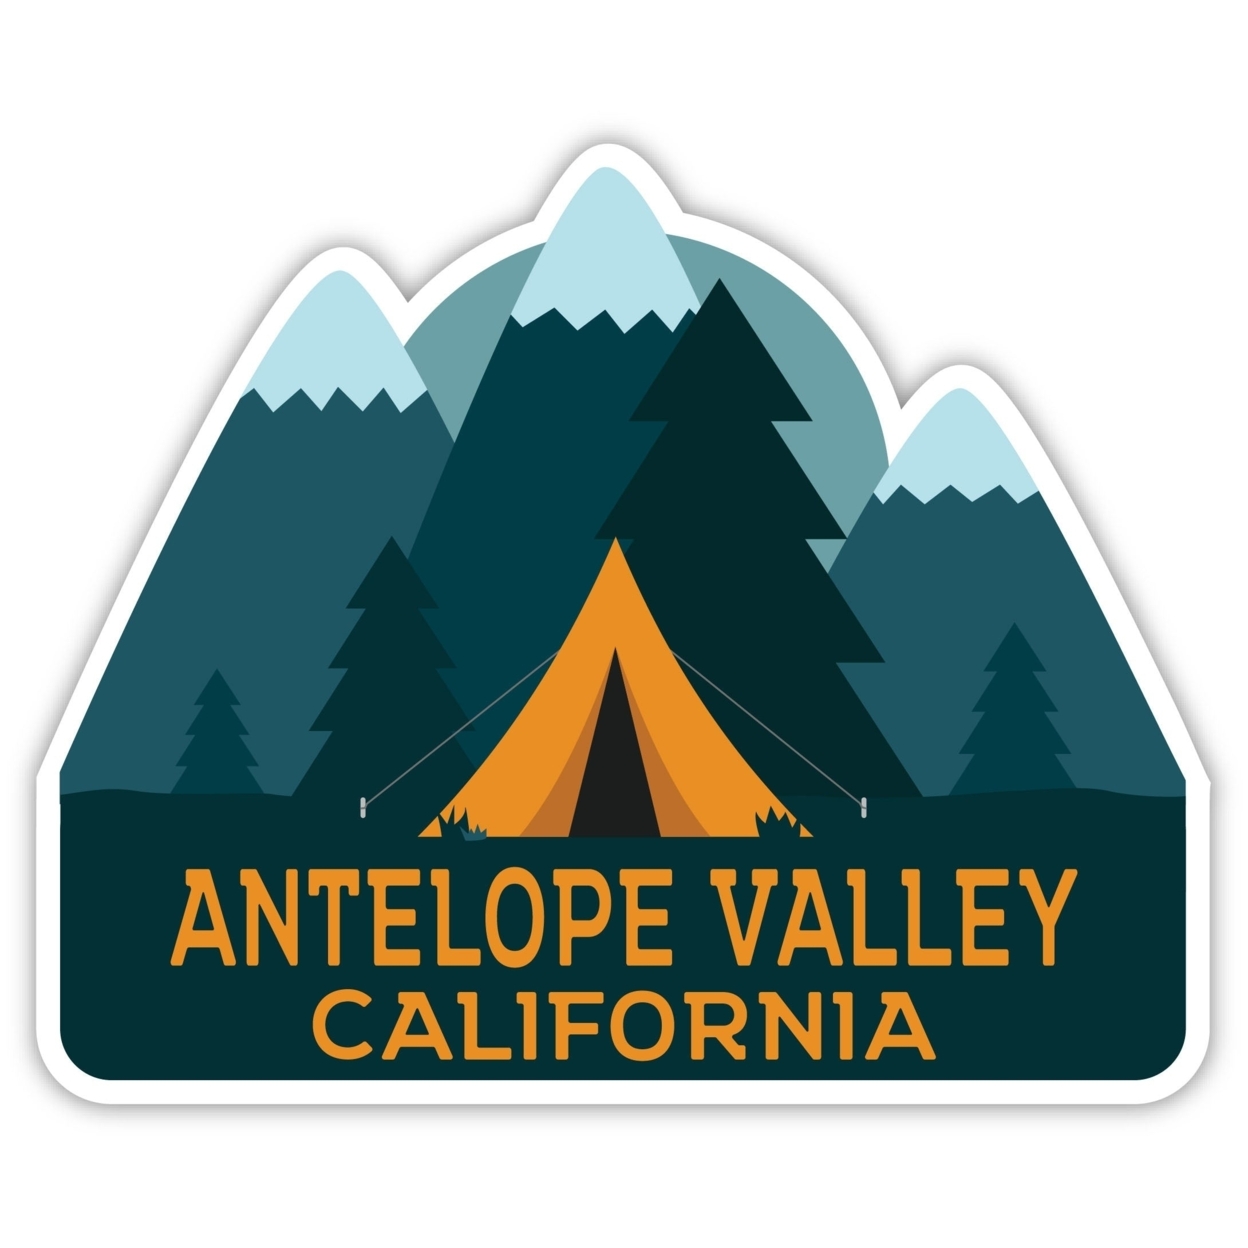 Antelope Valley California Souvenir Decorative Stickers (Choose Theme And Size) - Single Unit, 6-Inch, Bear